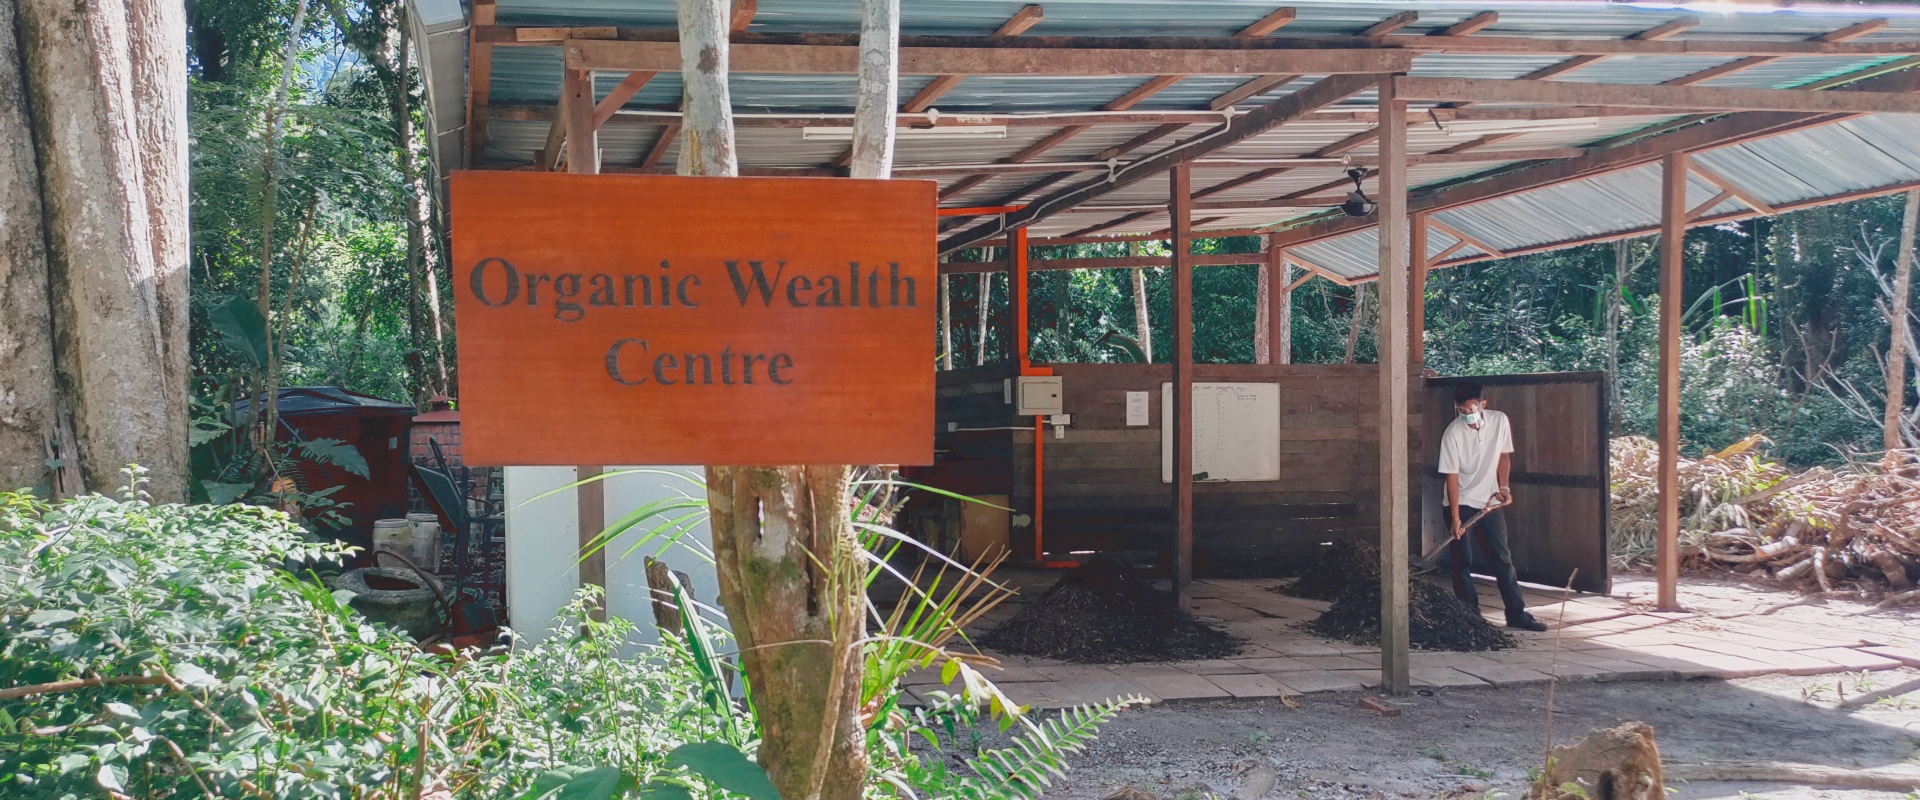 Organic Wealth Centre, the place where organic waste turns into rich compost to replace chemical fertilisers.